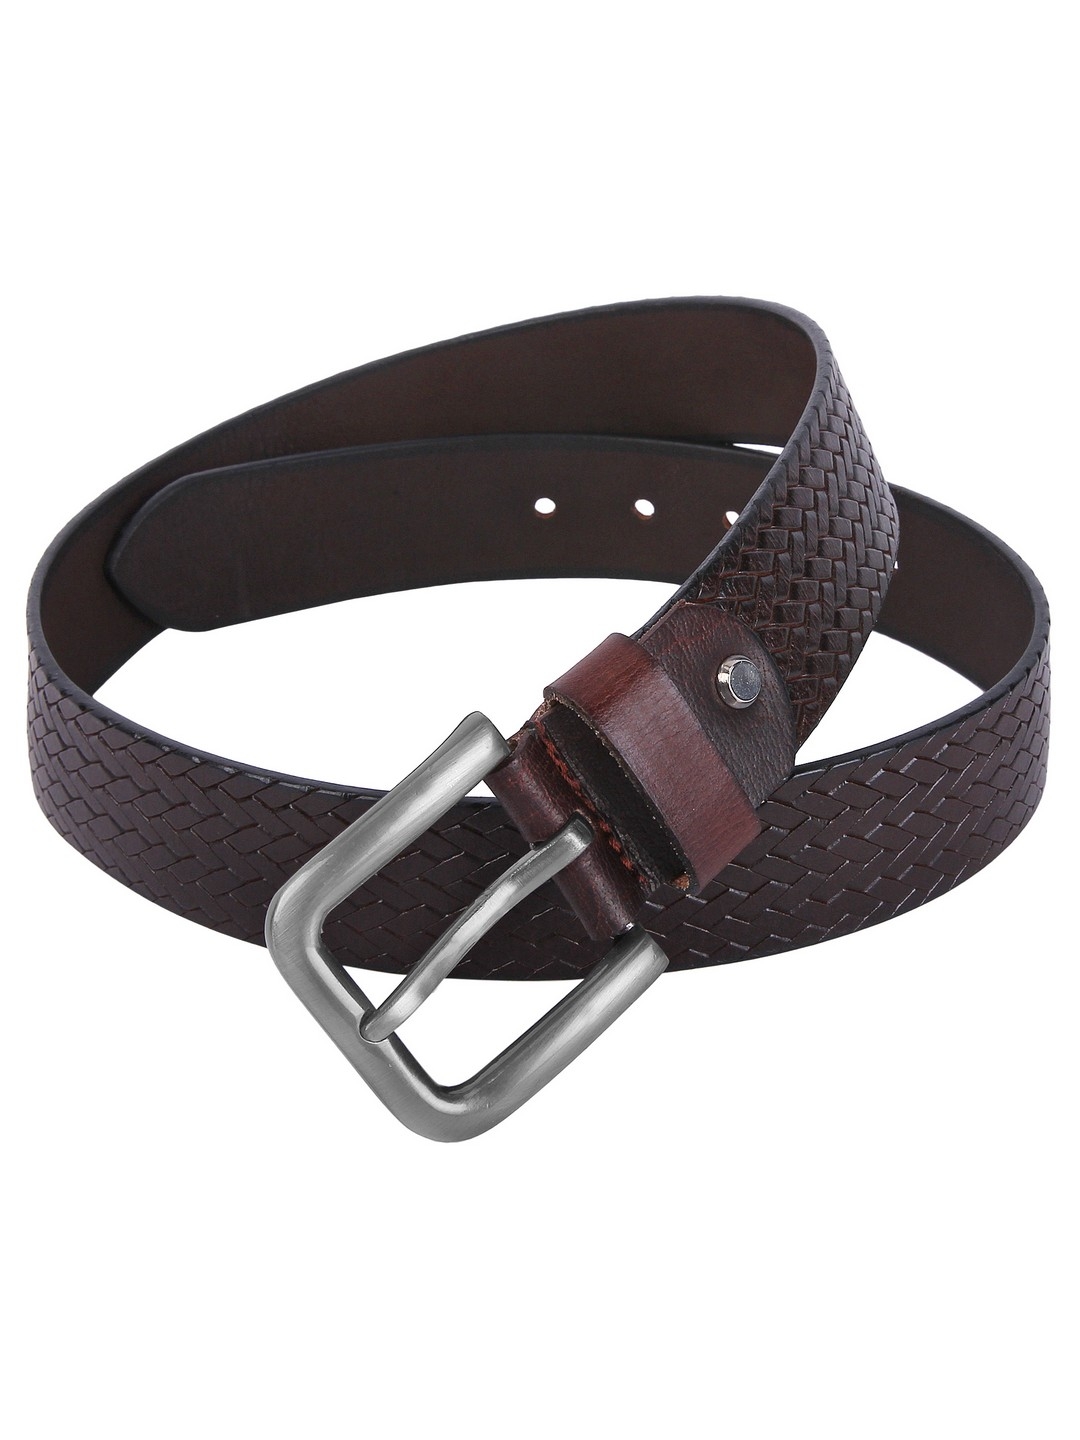 CREATURE | Creature Textured Print Formal/Casual Brown Genuine Leather Belts For Men 2